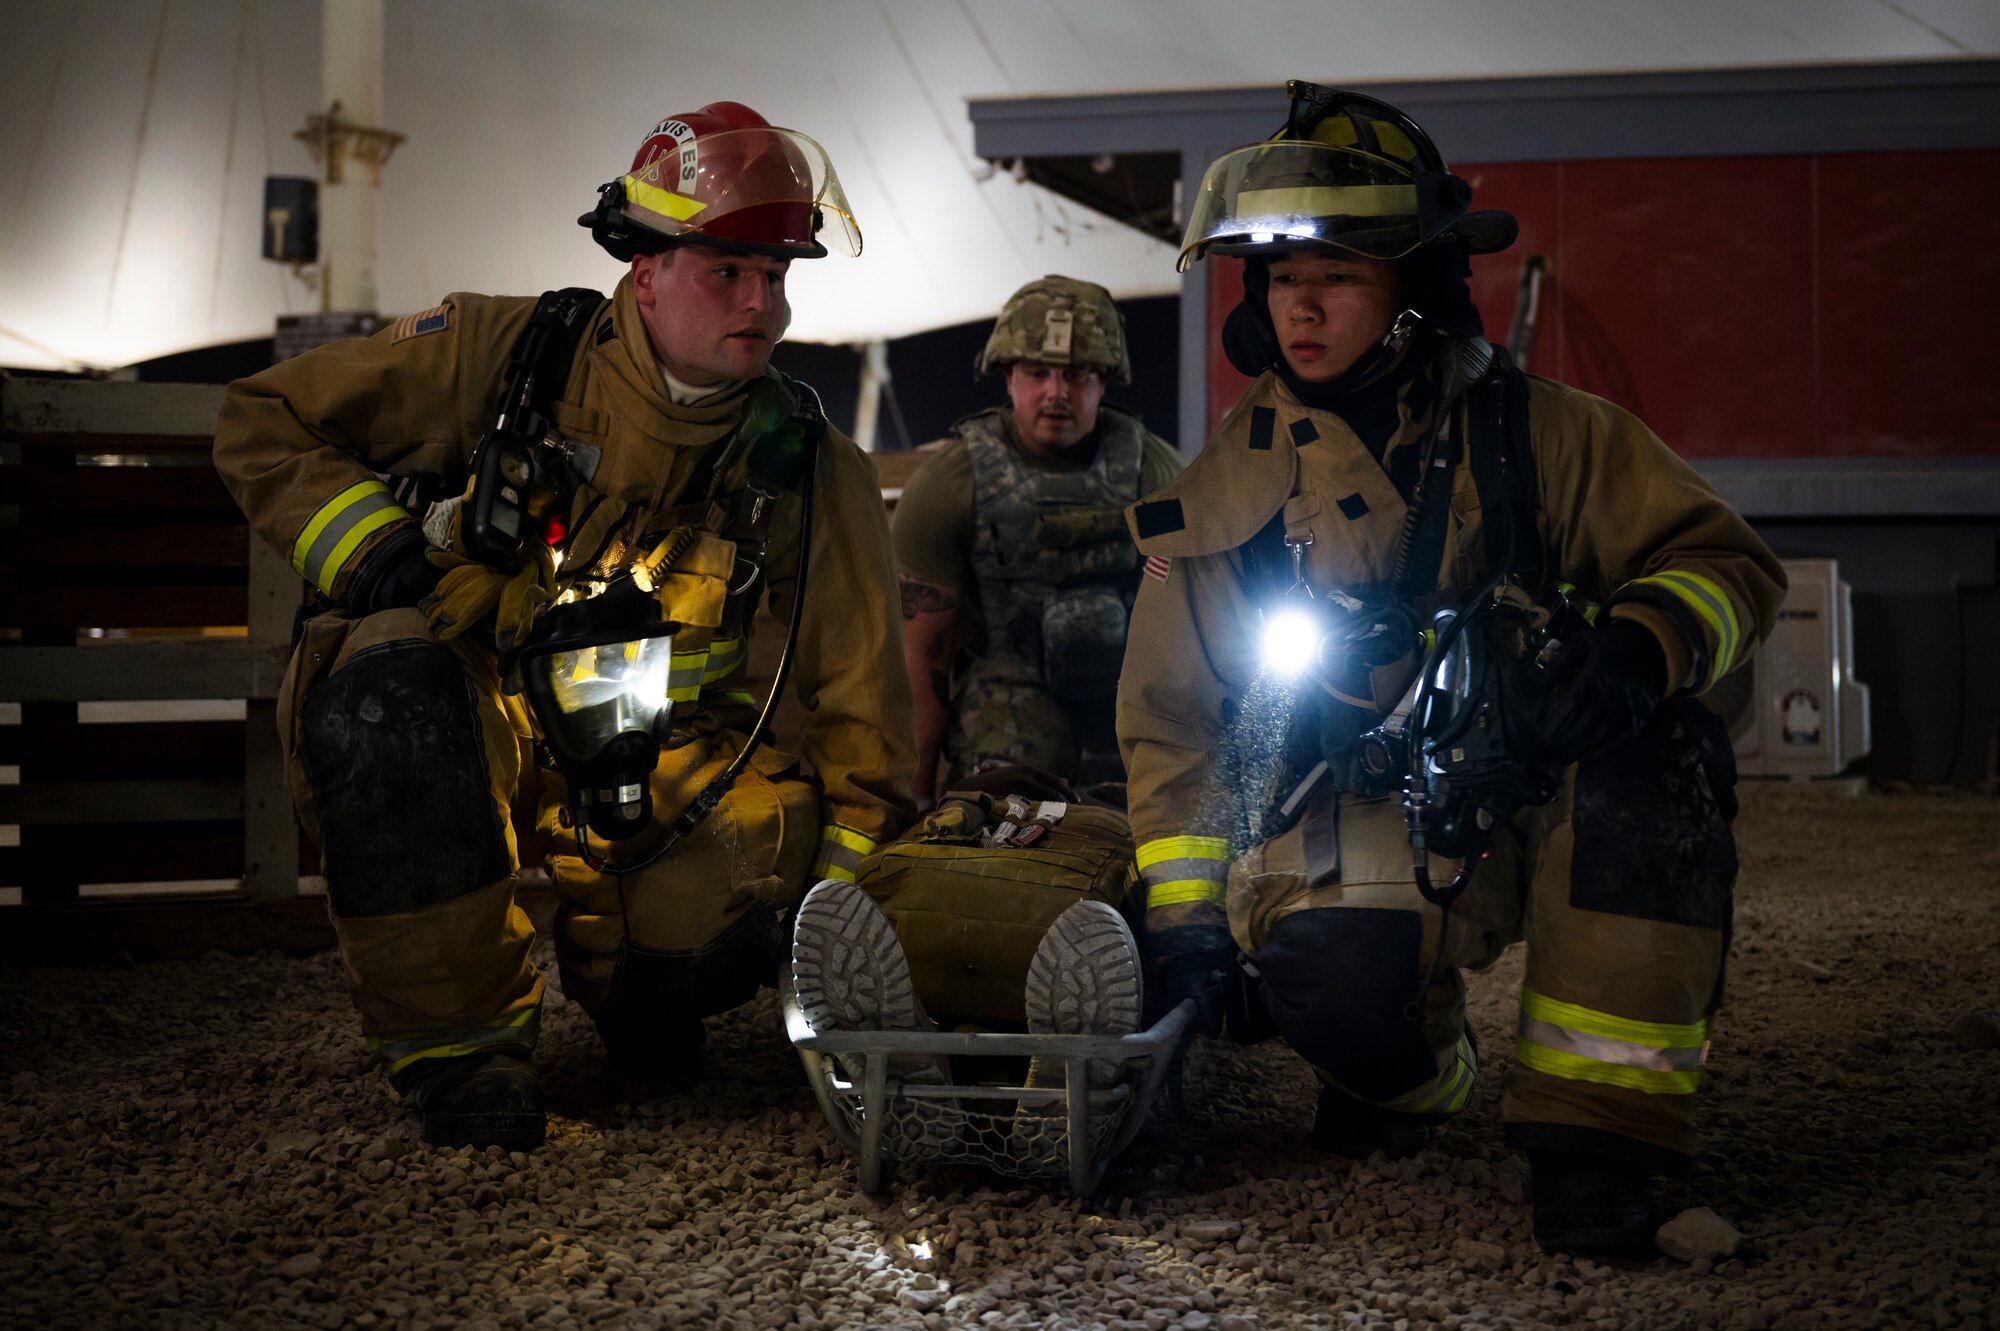 Photo of U.S. Air Force firefighters providing self-aid to a member during a training scenario